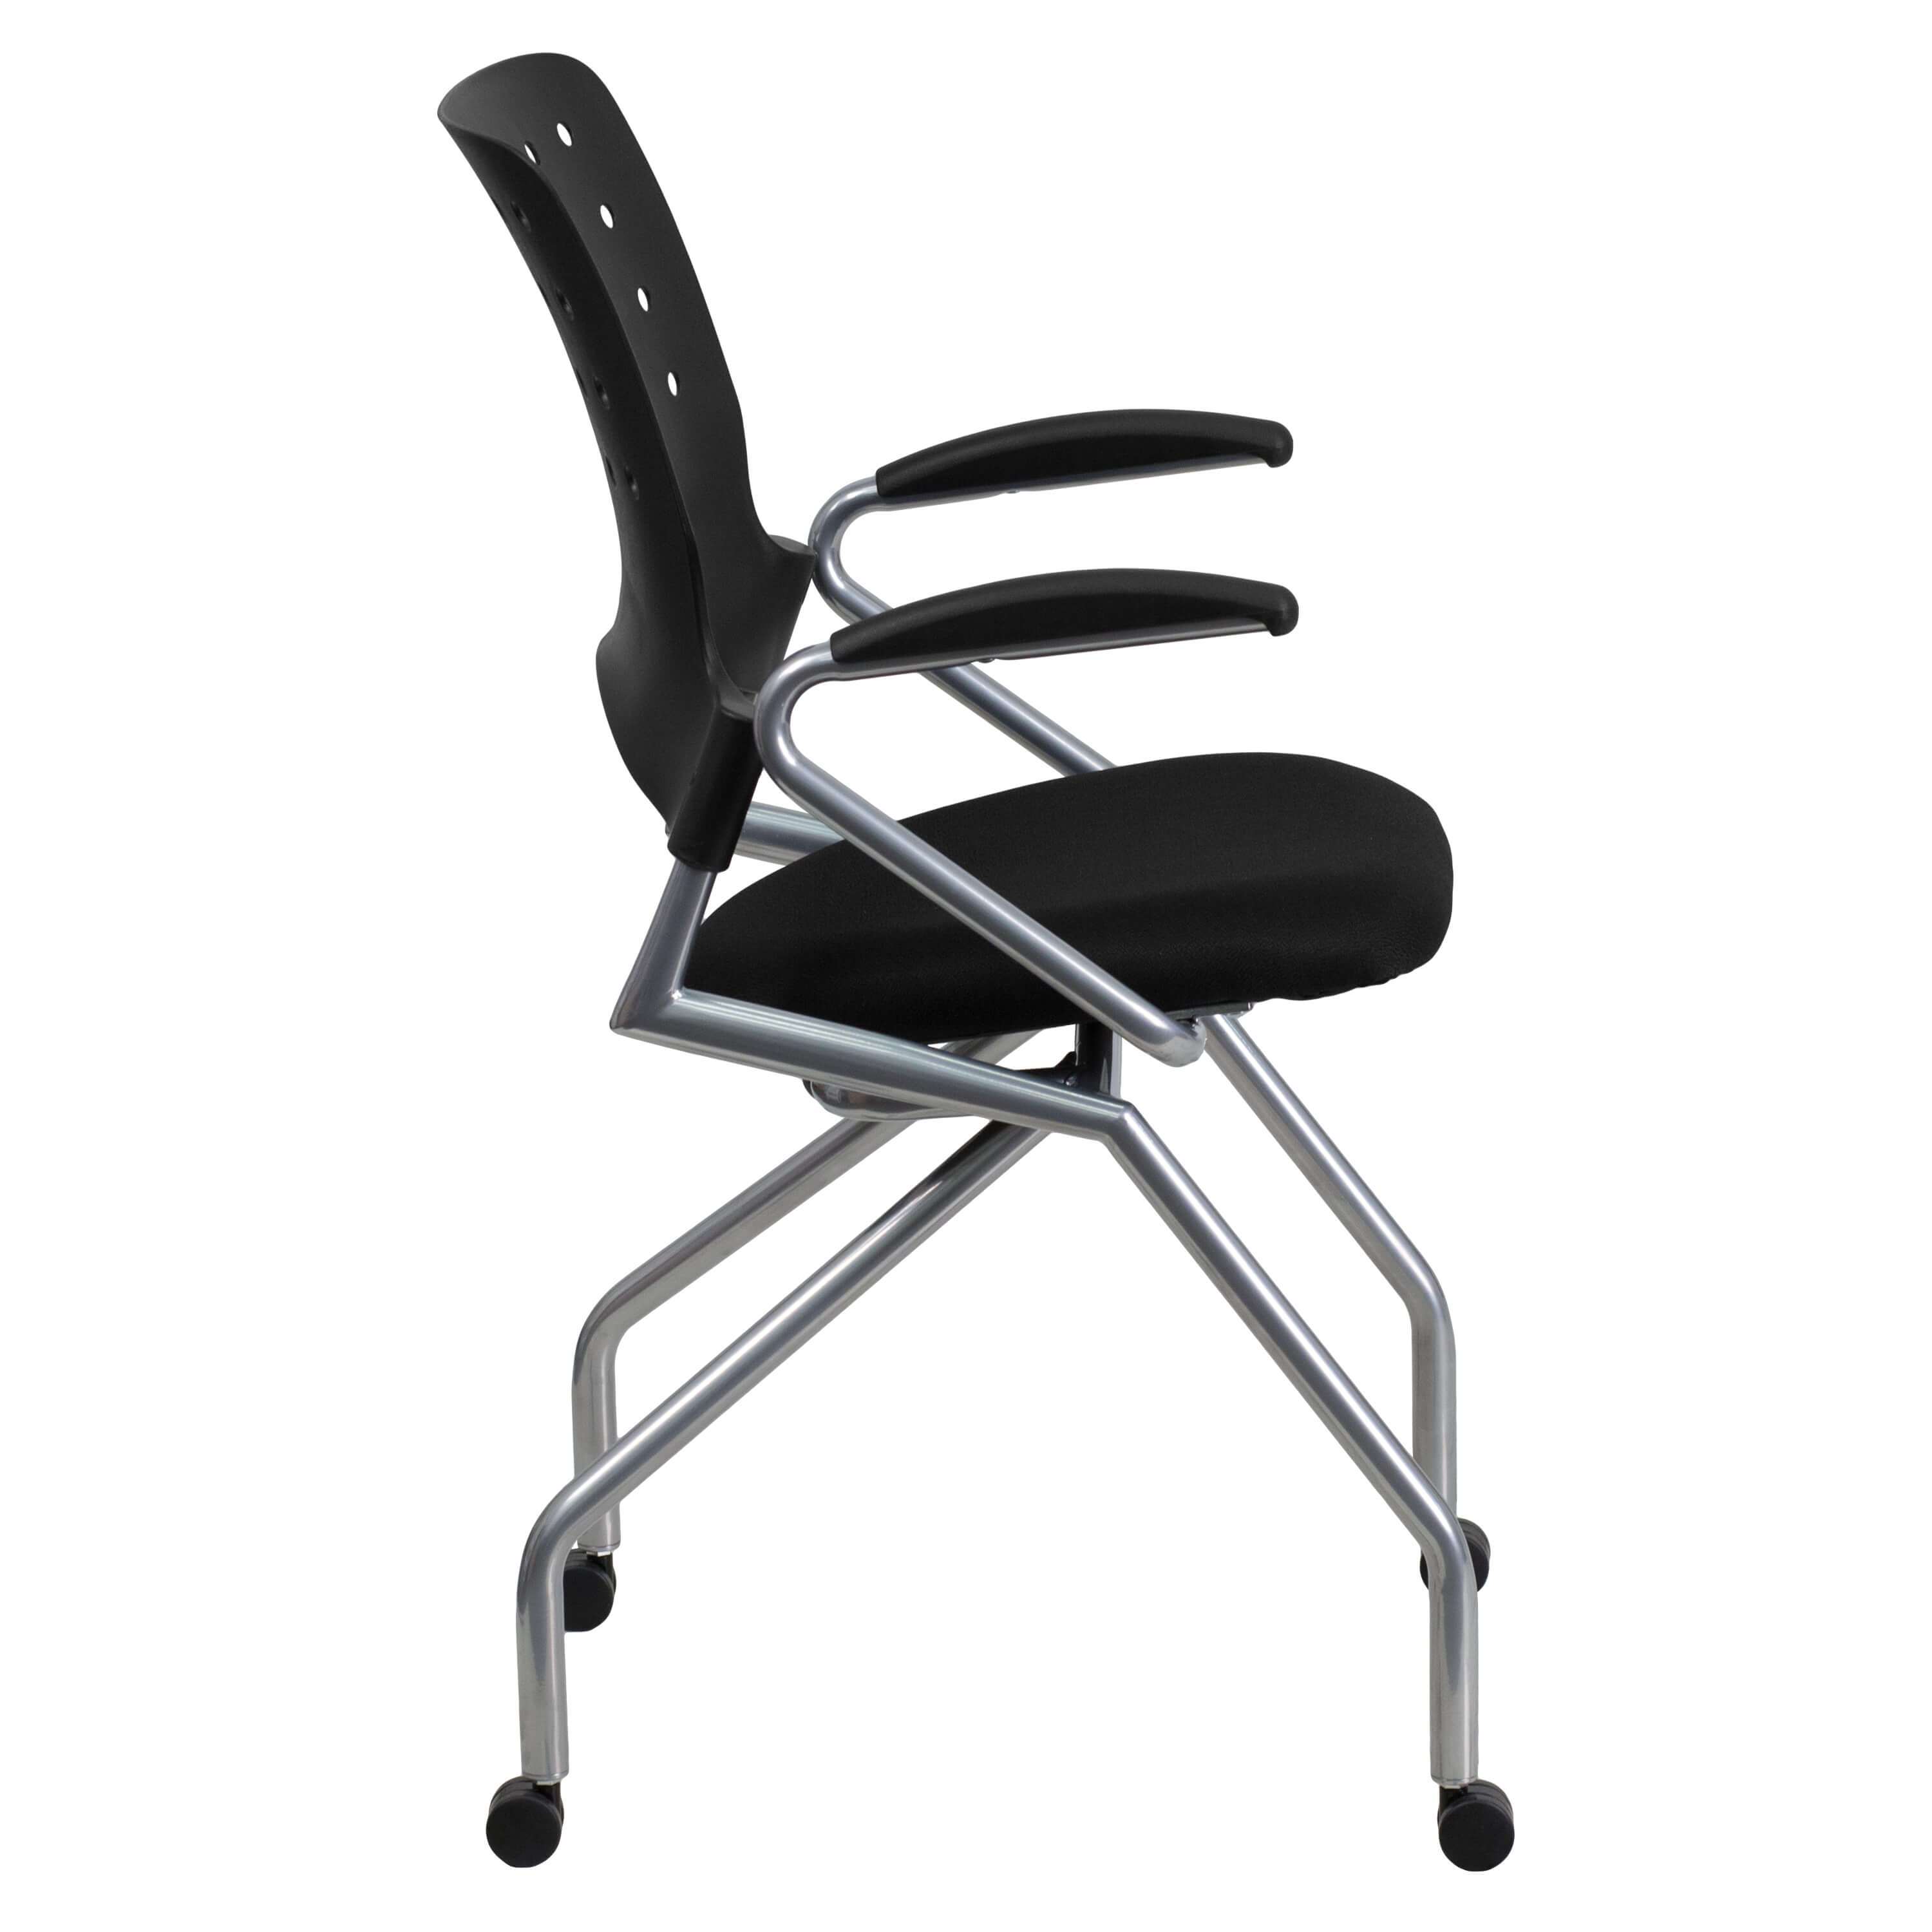 Plastic office chair side